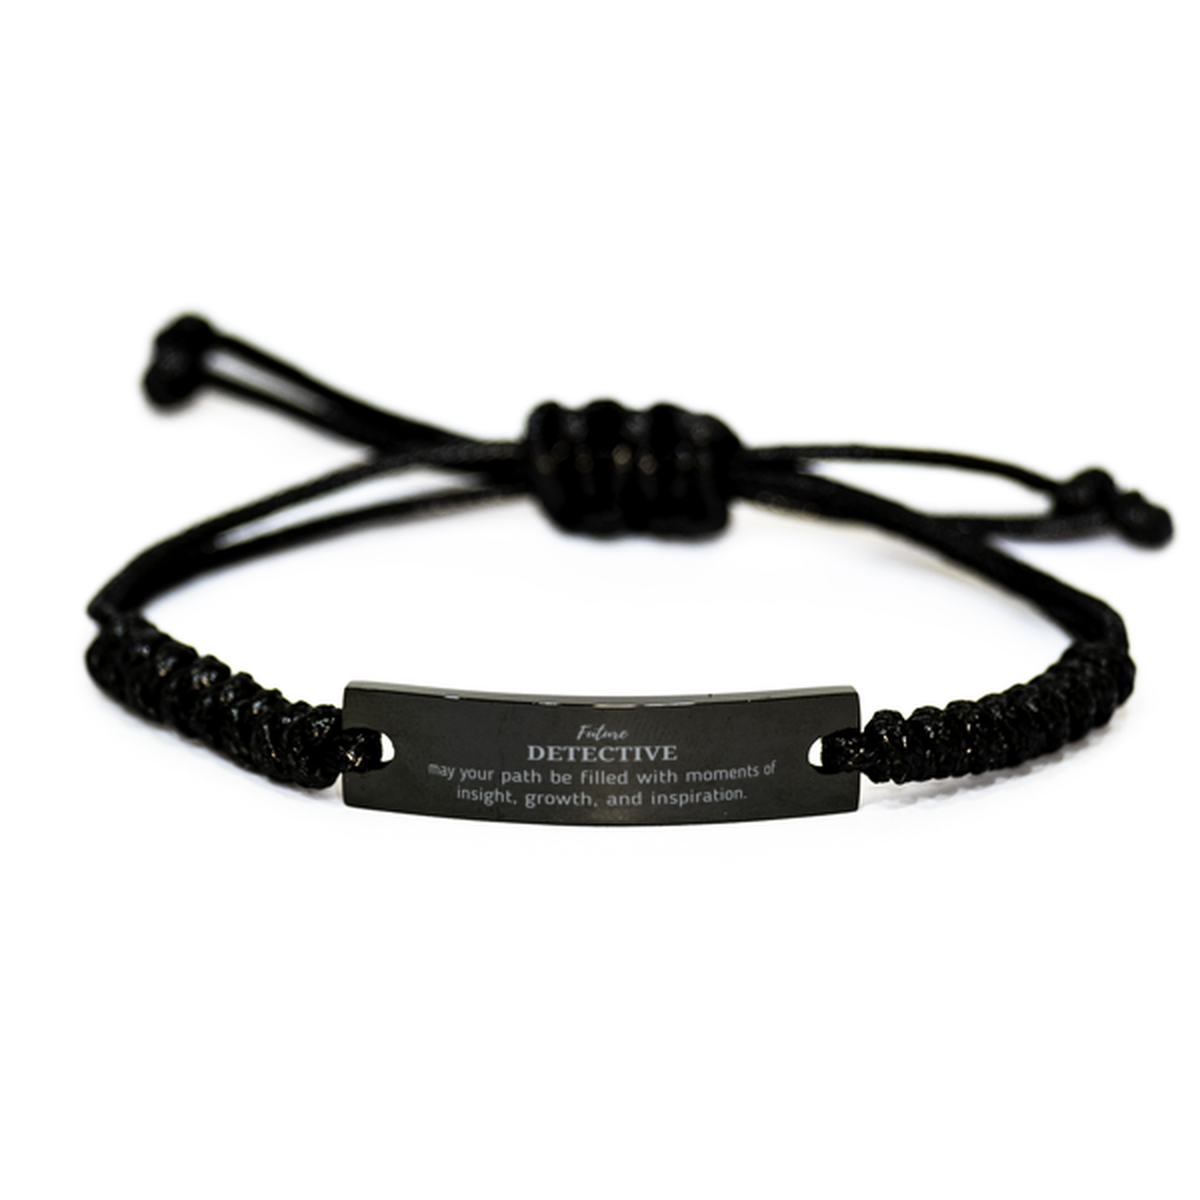 Future Detective Gifts, May your path be filled with moments of insight, Graduation Gifts for New Detective, Christmas Unique Black Rope Bracelet For Men, Women, Friends